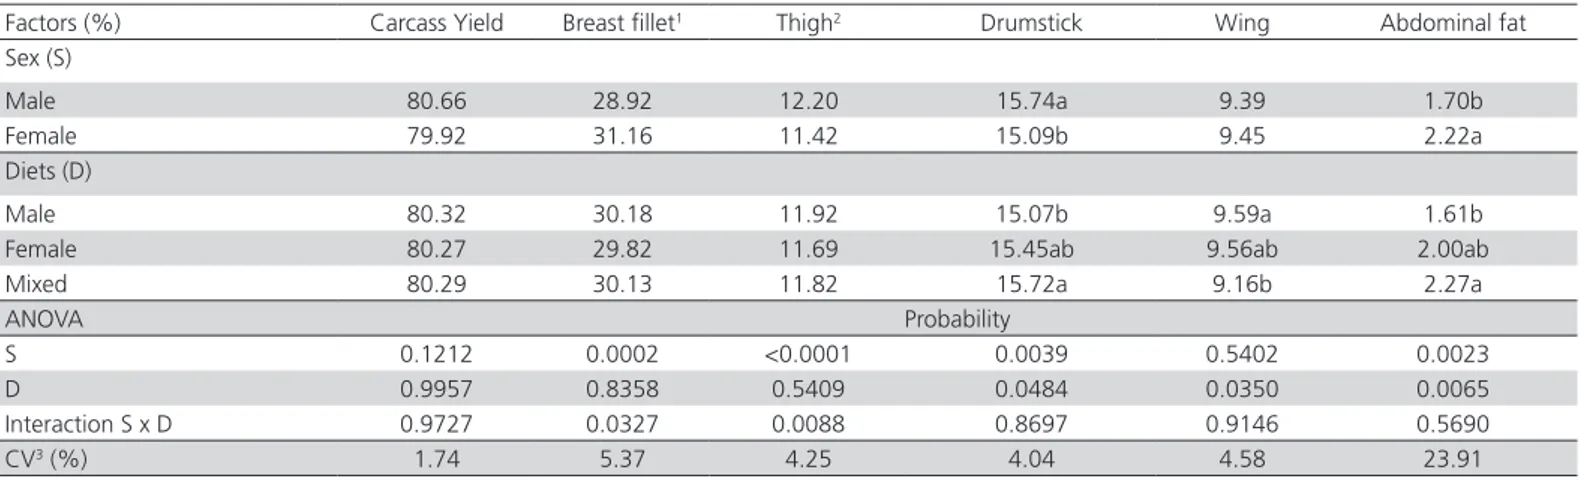 Table 5 – Analysis of variance for carcass characteristics of broiler chickens at 42 days old.